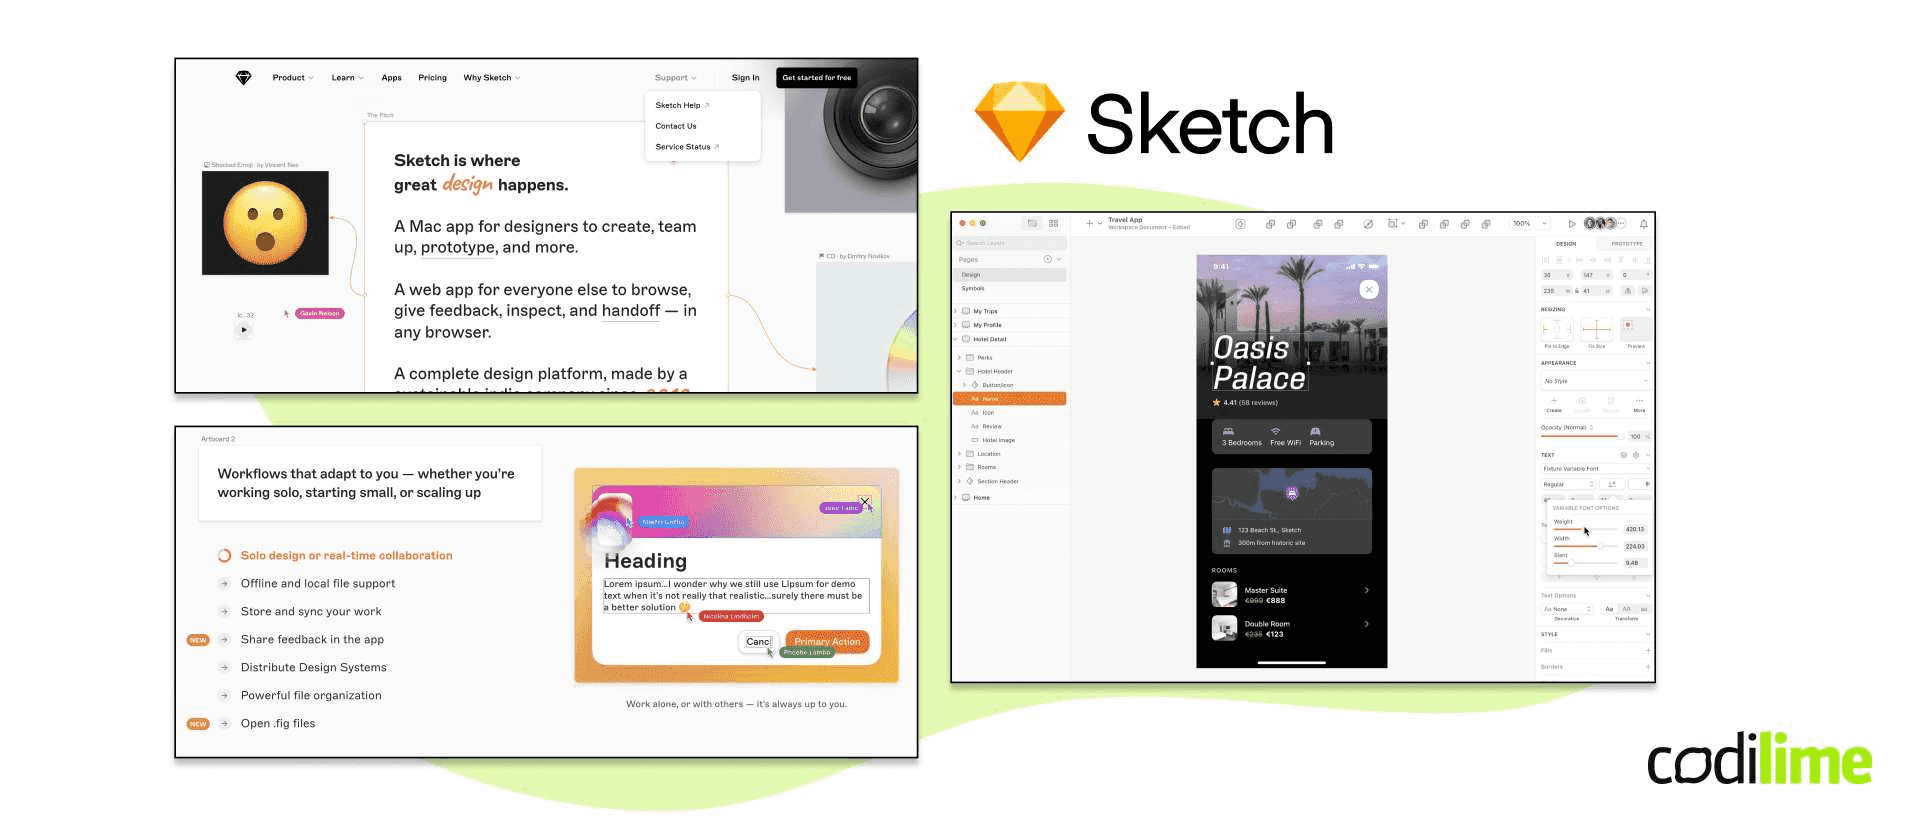  Tools for prototyping - Sketch